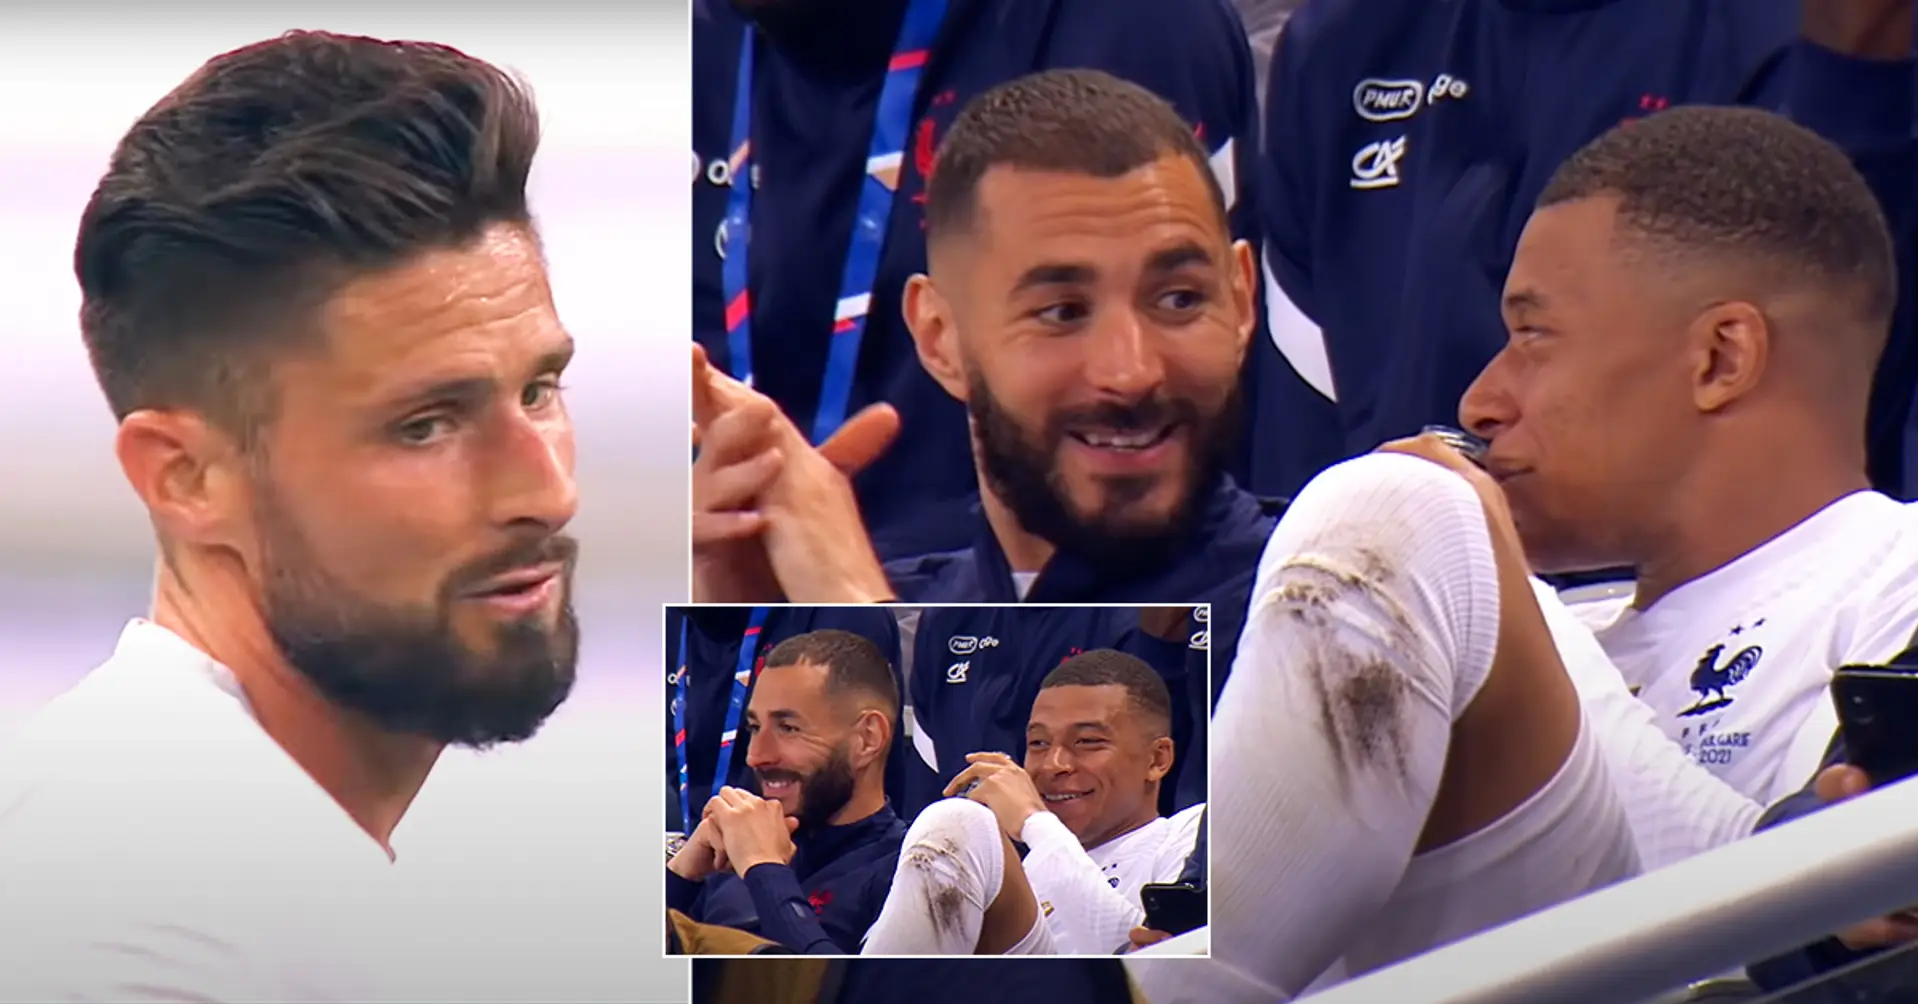 Karim Benzema and Kylian Mbappe caught on camera laughing after Oliver Giroud’s goal